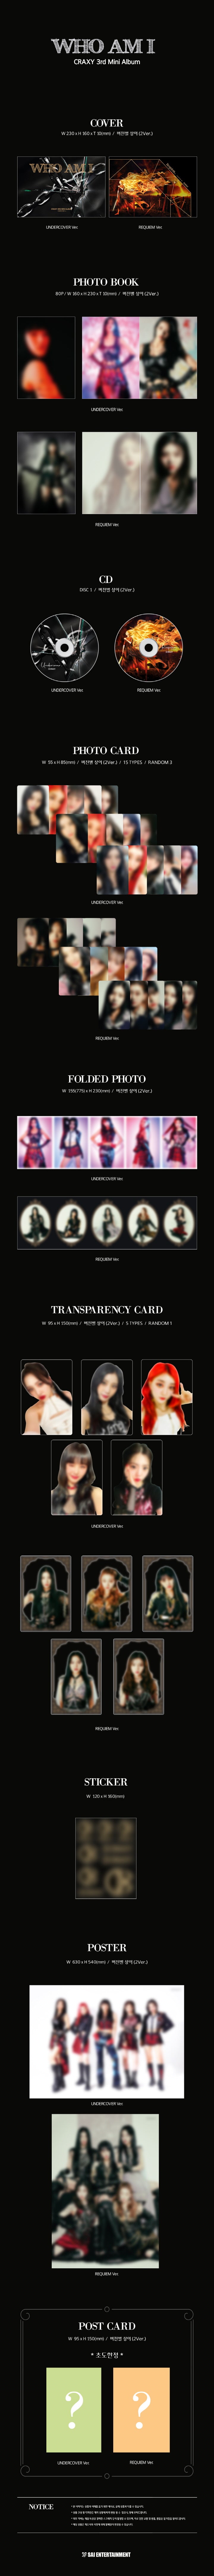 1 CD
1 Photo Book (80 pages)
3 Photo Cards (random out of 15 types)
1 Folded Photo
1 Transparency Card
1 Sticker